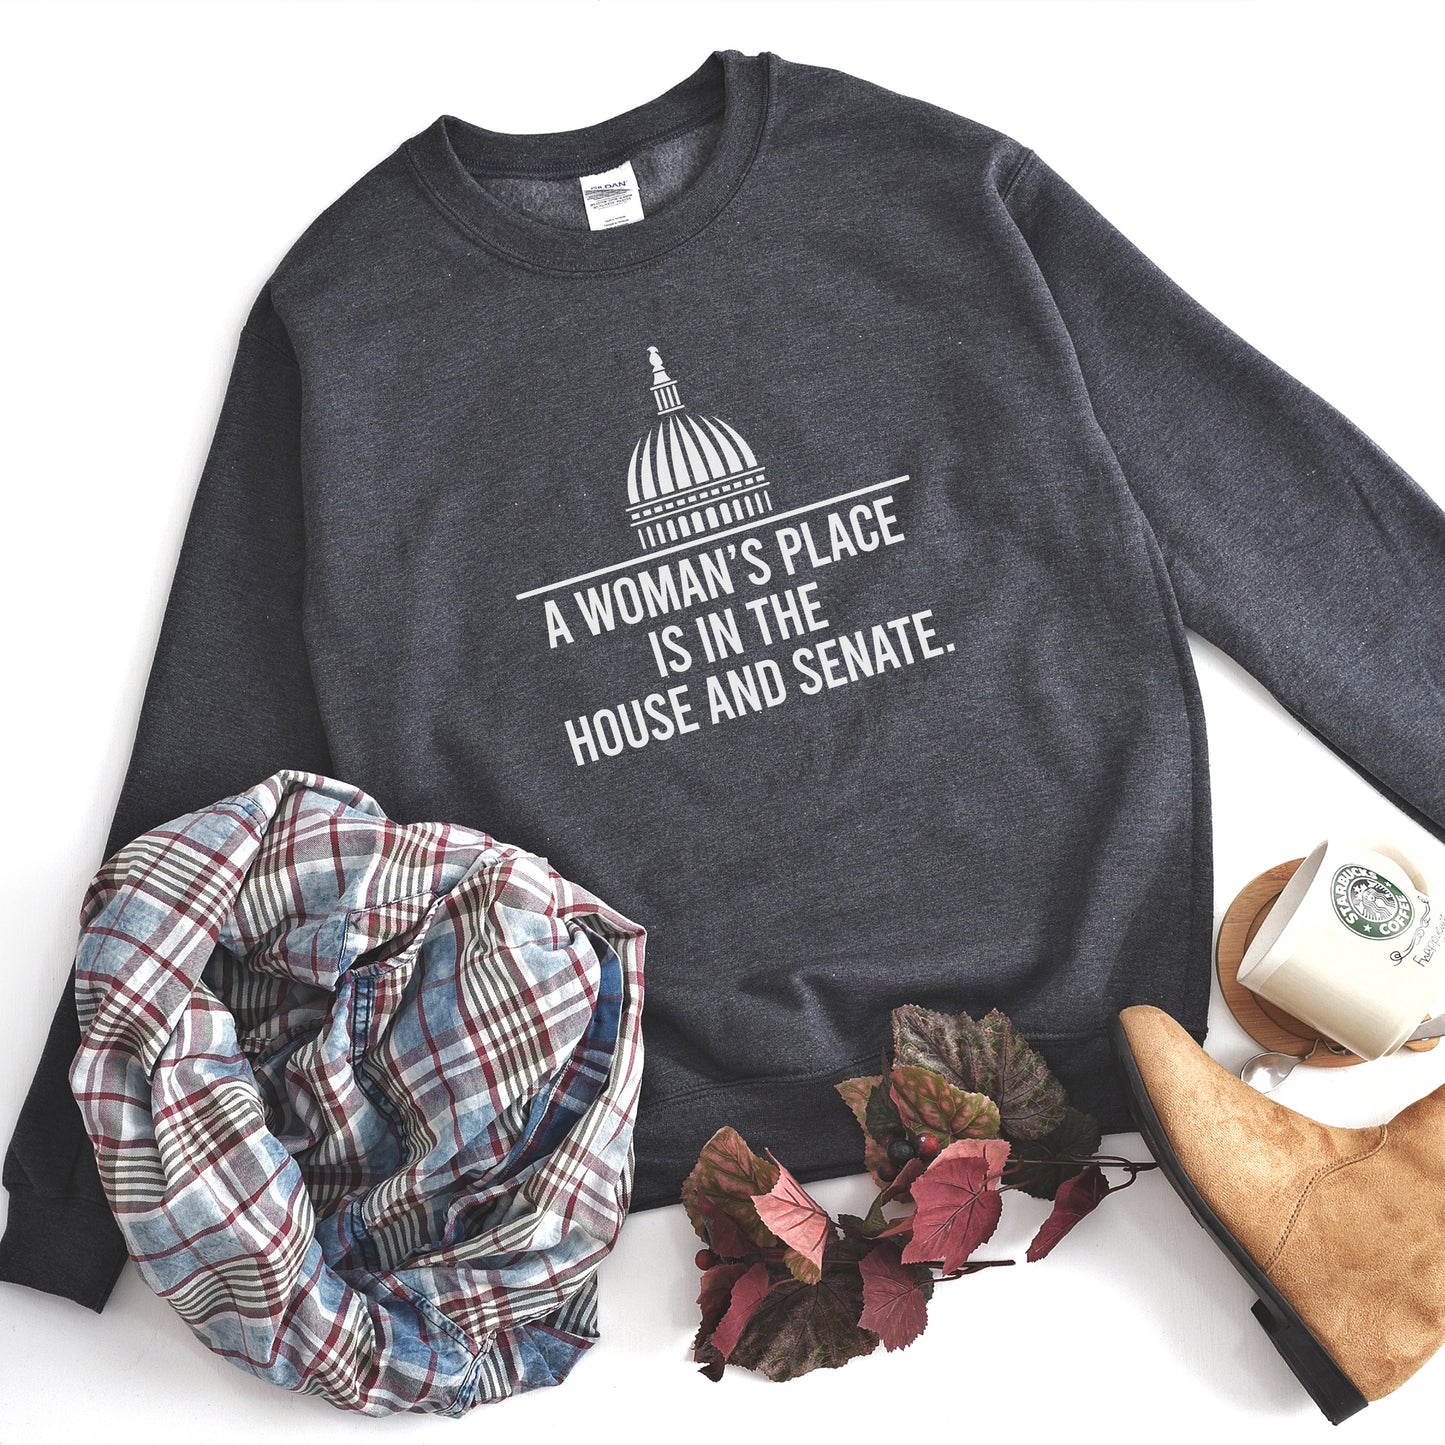 A Woman's Place is in the House and Senate Sweatshirt